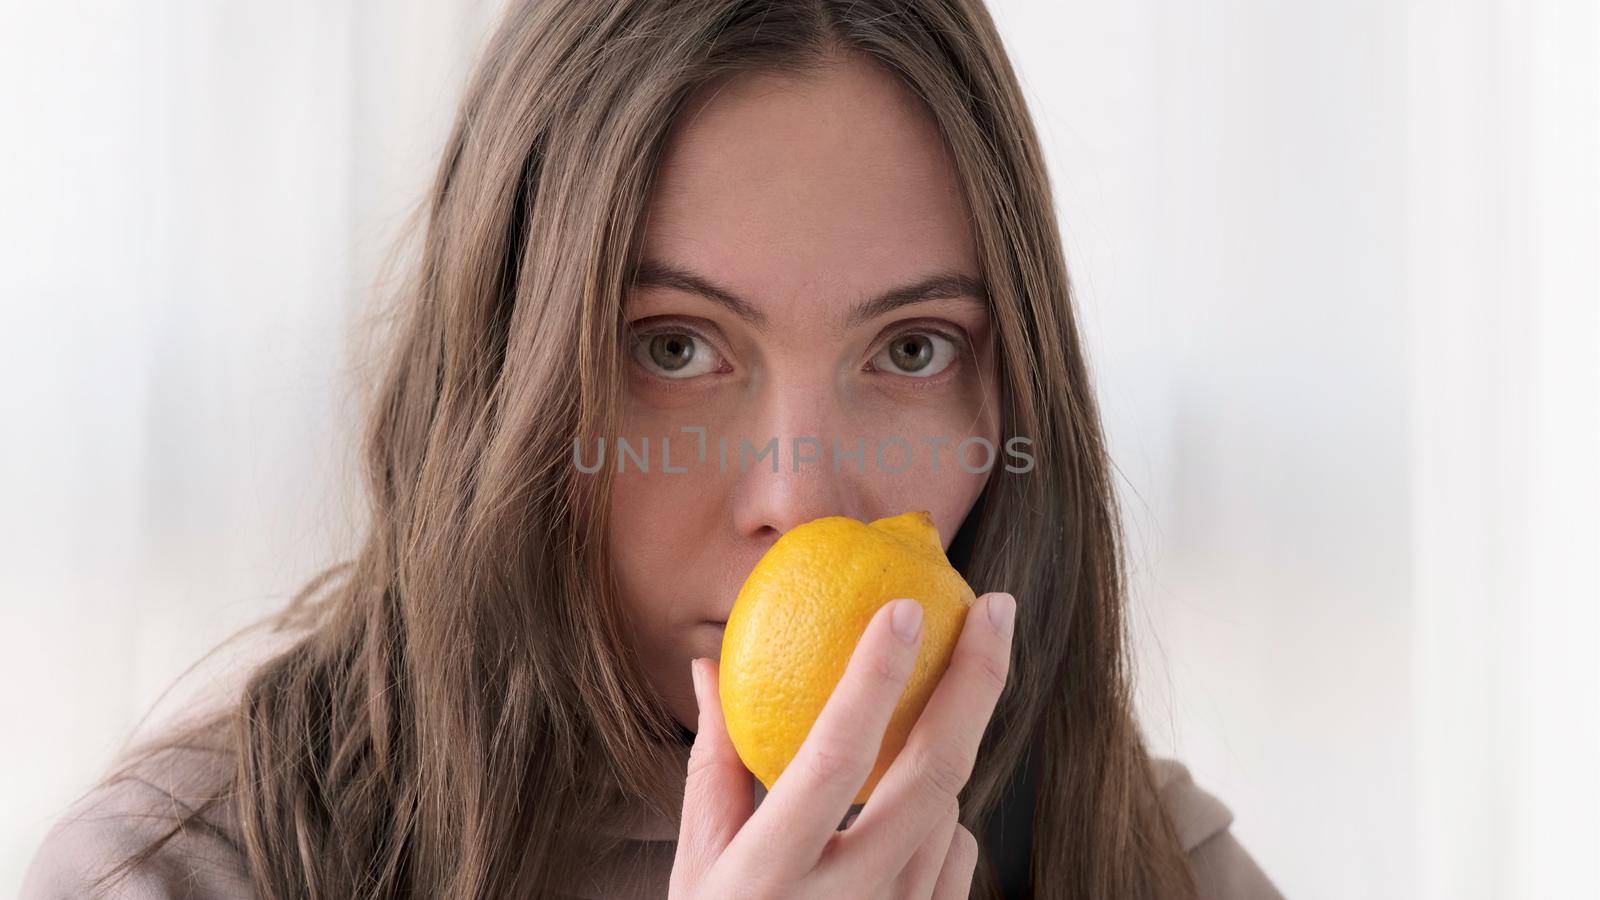 Woman sniffs lemon and does not smell by Demkat